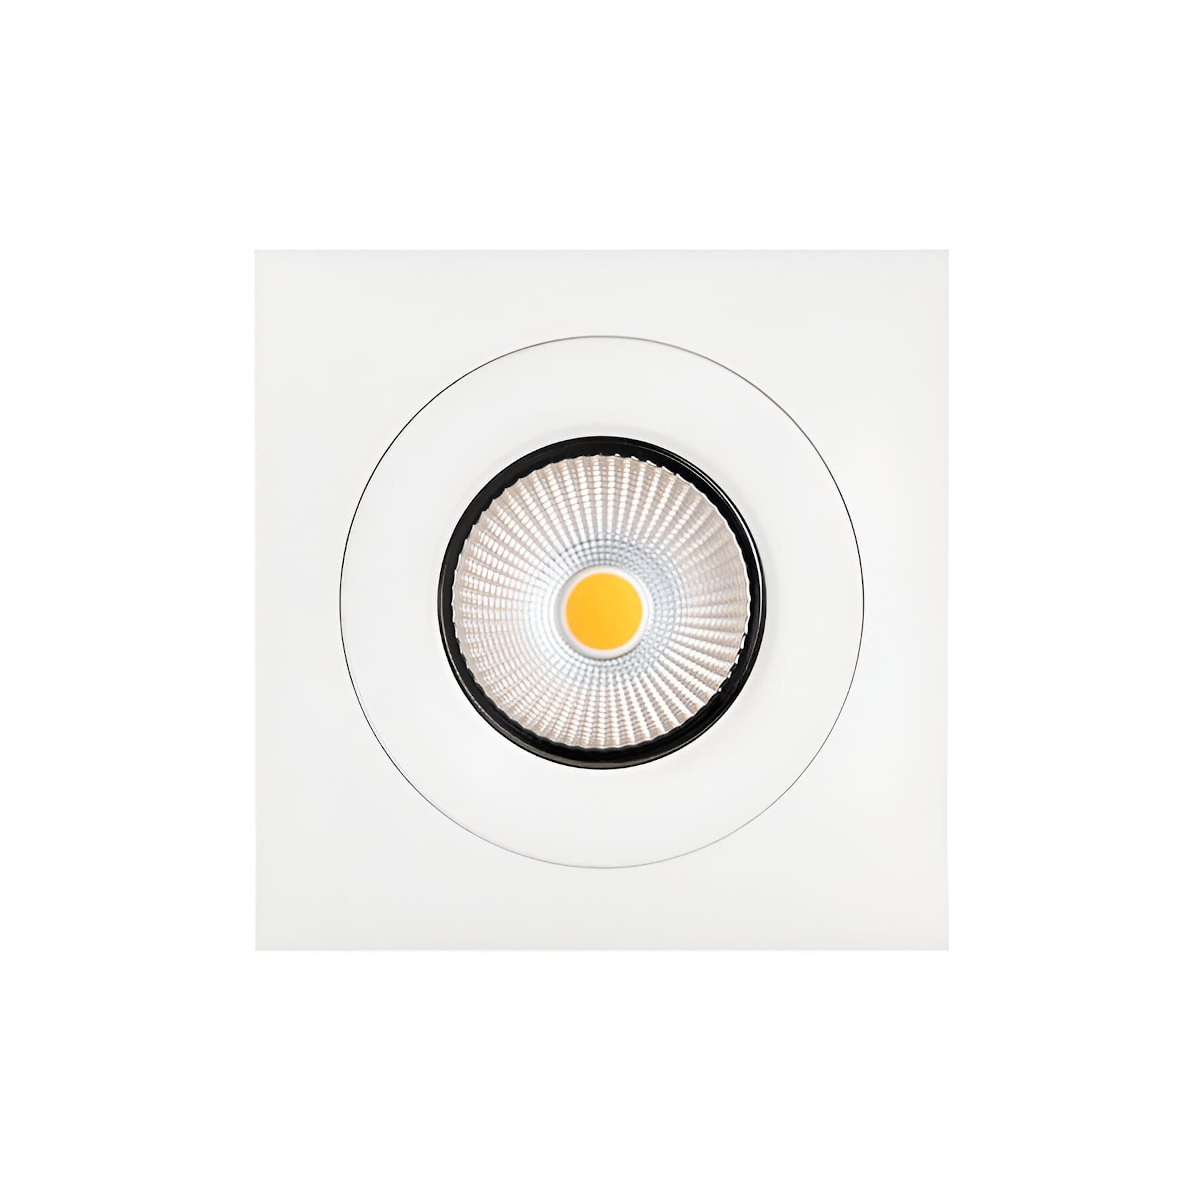 Product image of Zela Square white Adapter plate with downlight inside